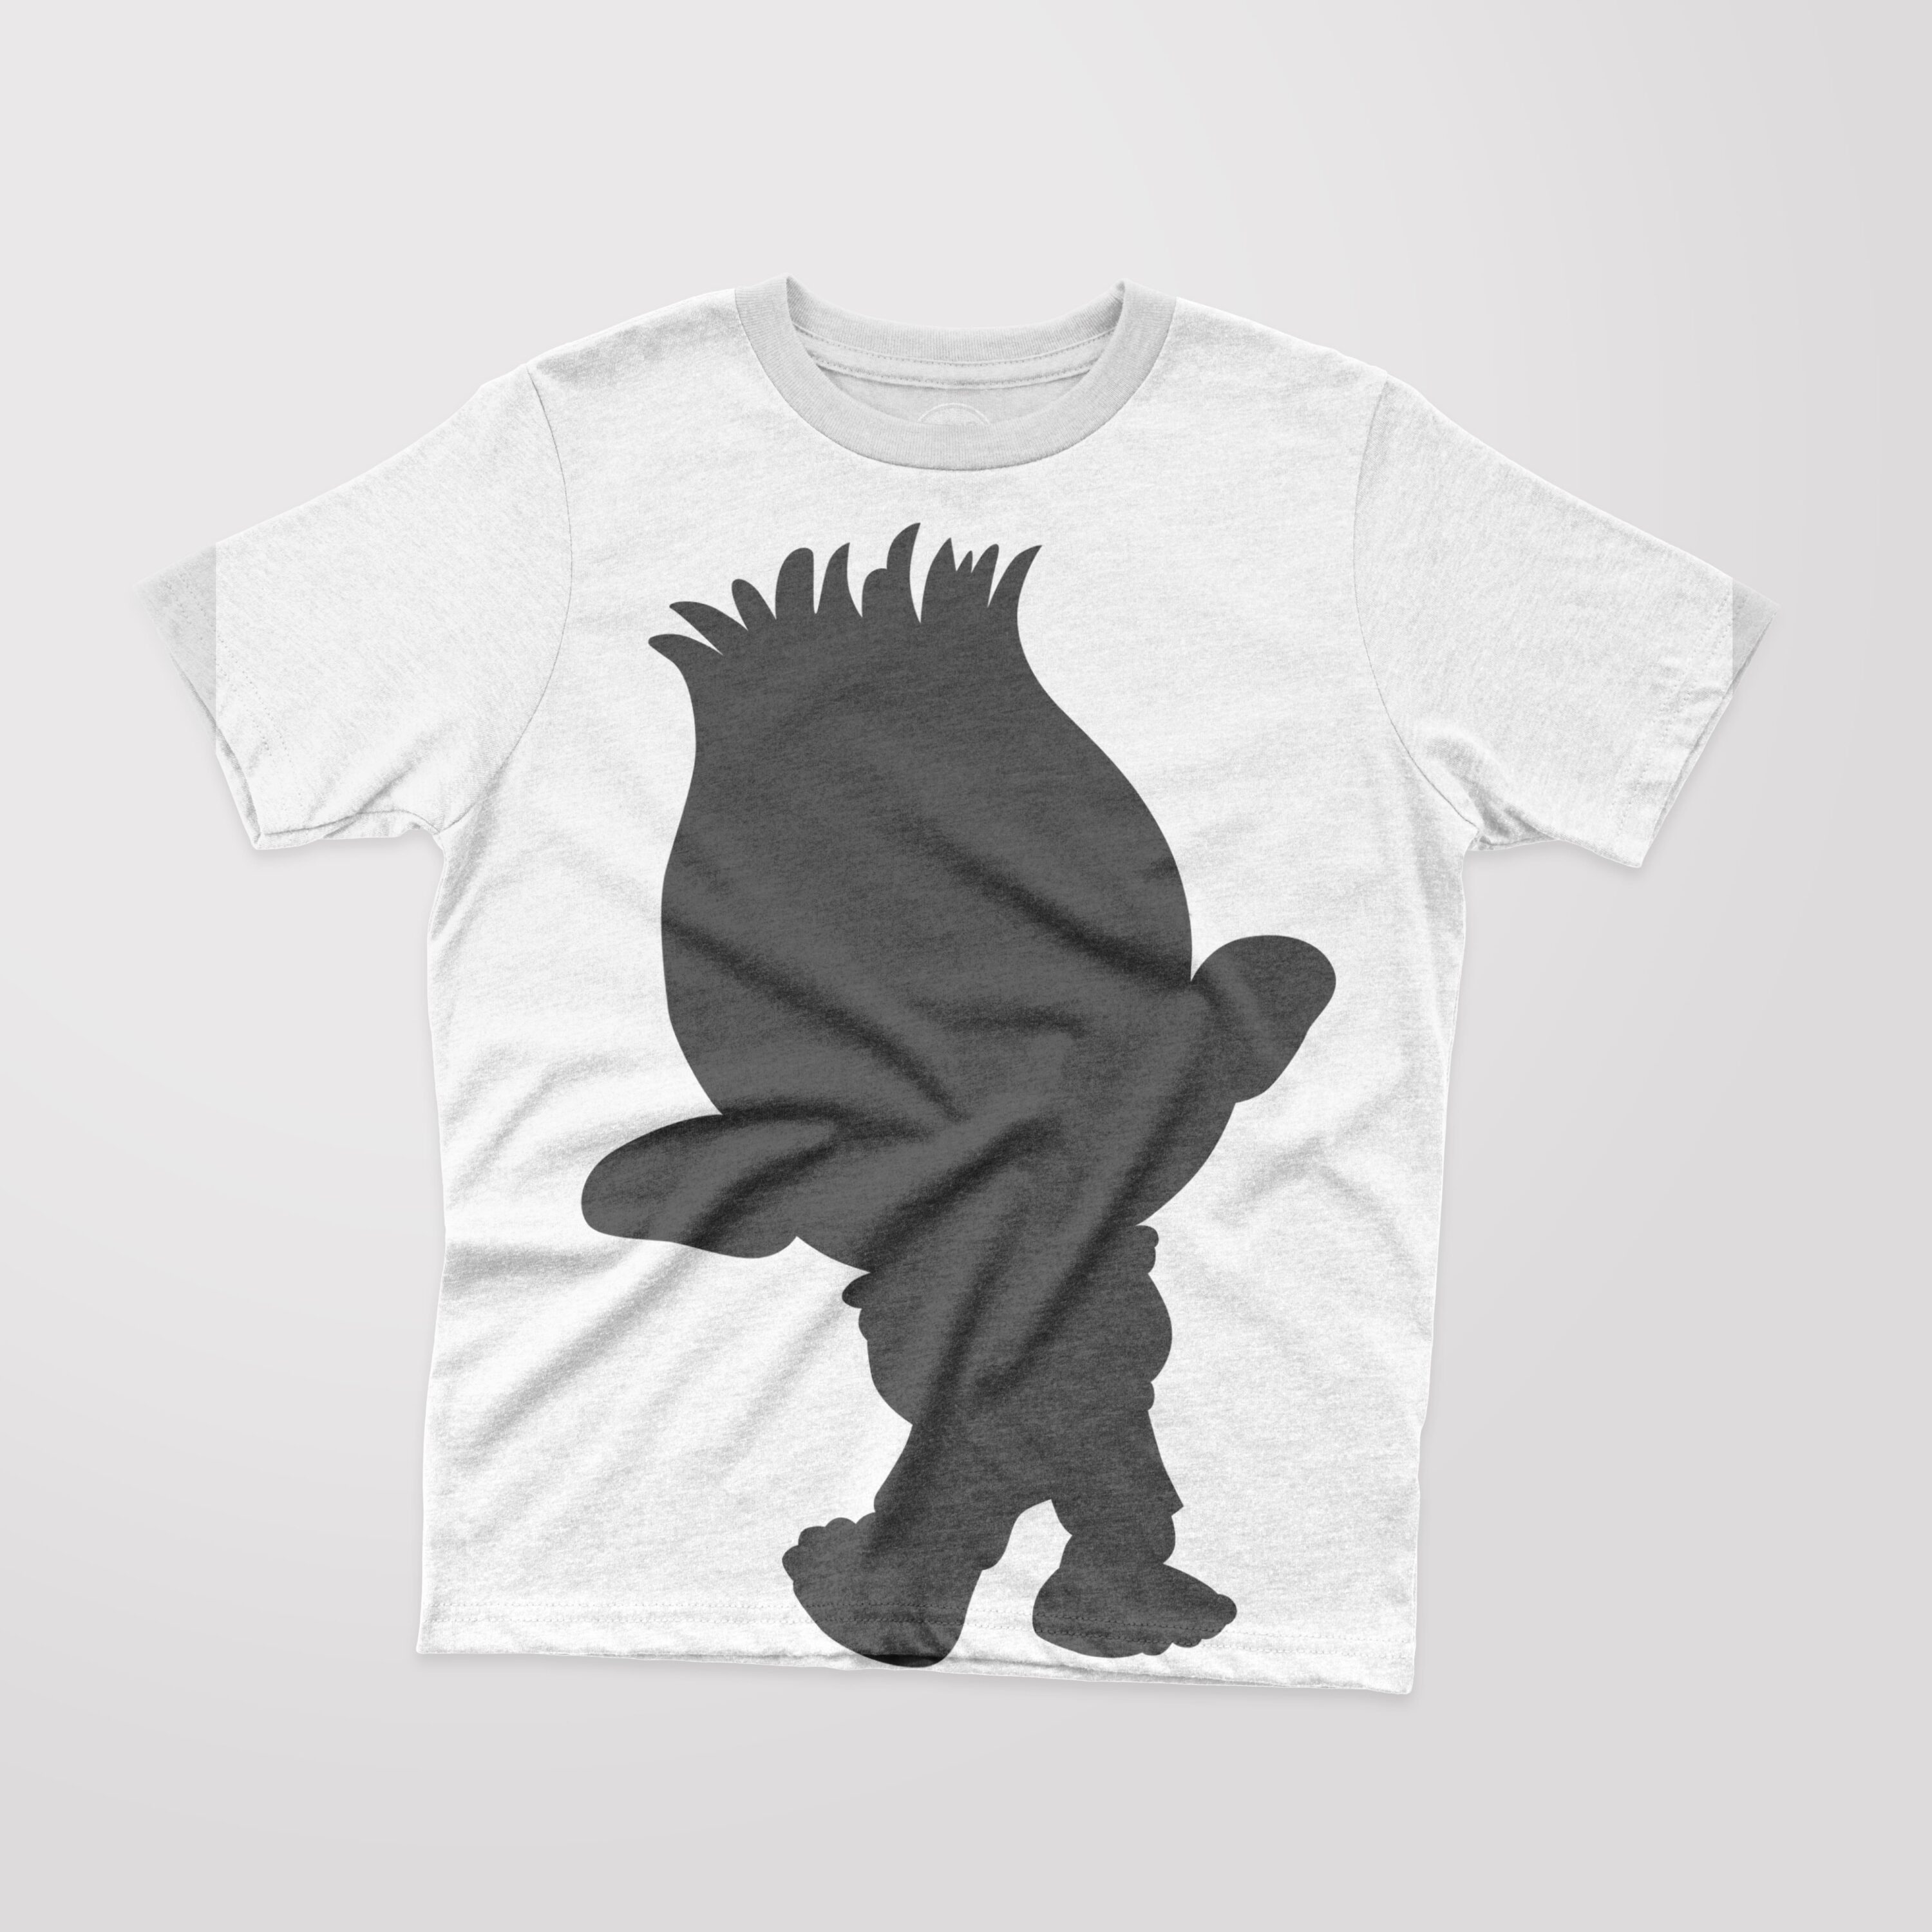 White T-shirt with a black silhouette of a cartoon character - Branch.